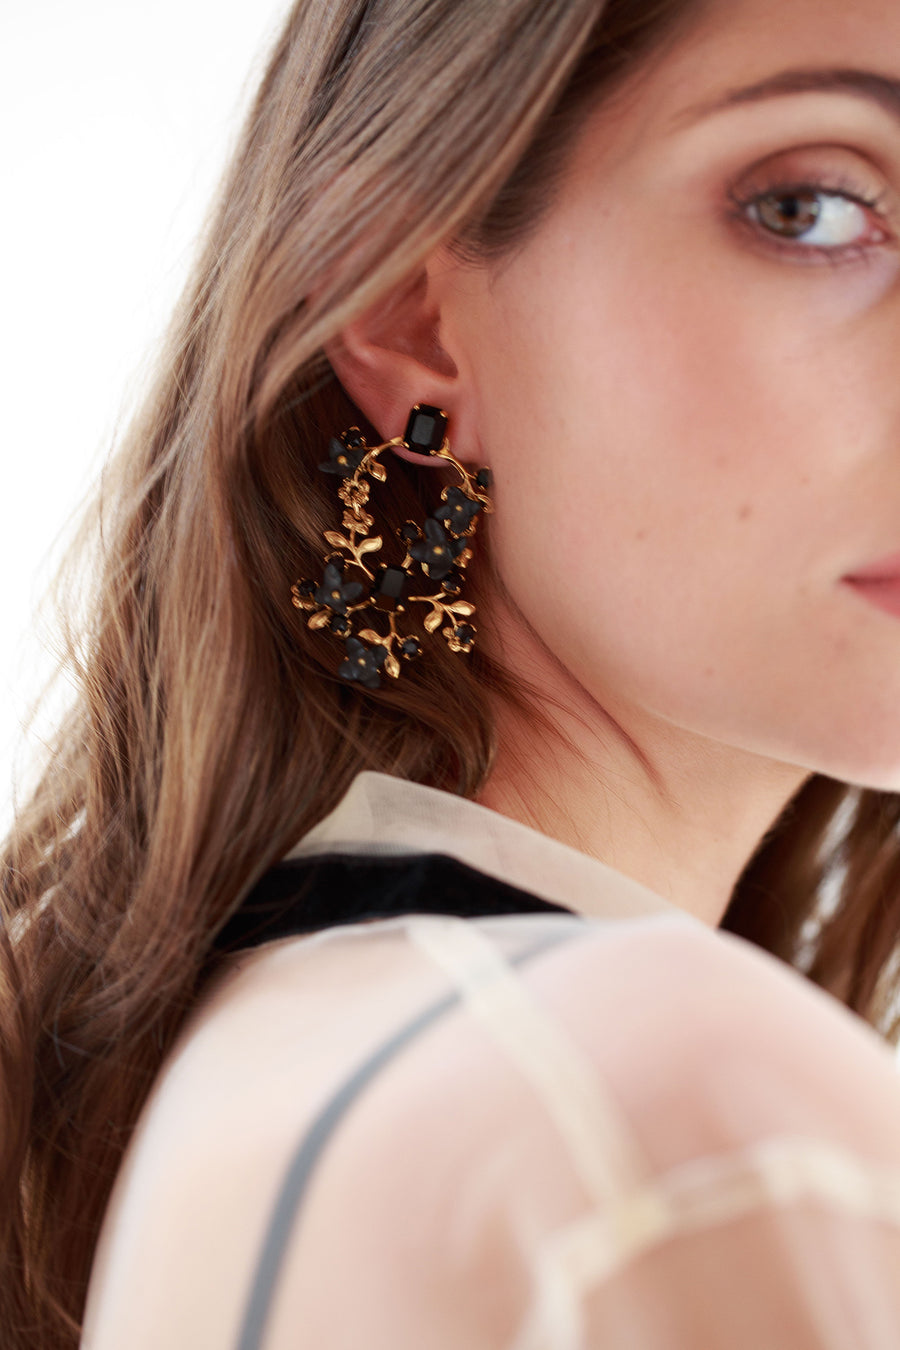 Black and gold statement earrings with flowers